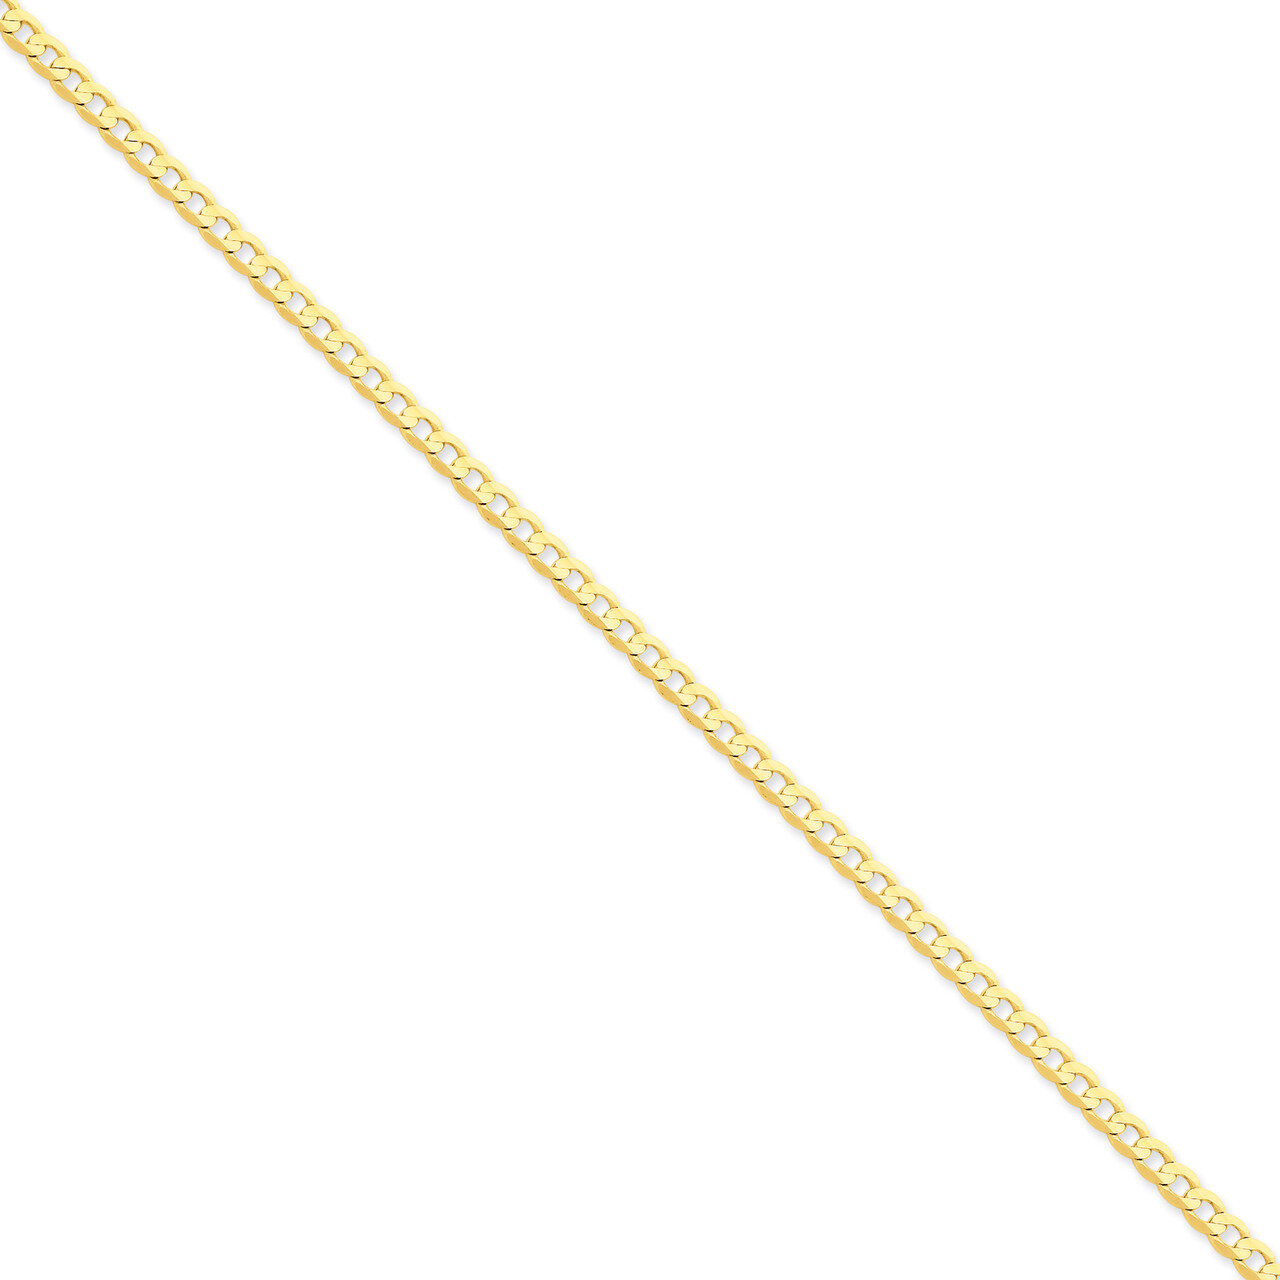 3.8mm Concave Curb Chain 24 Inch 14k Gold LCR100-24